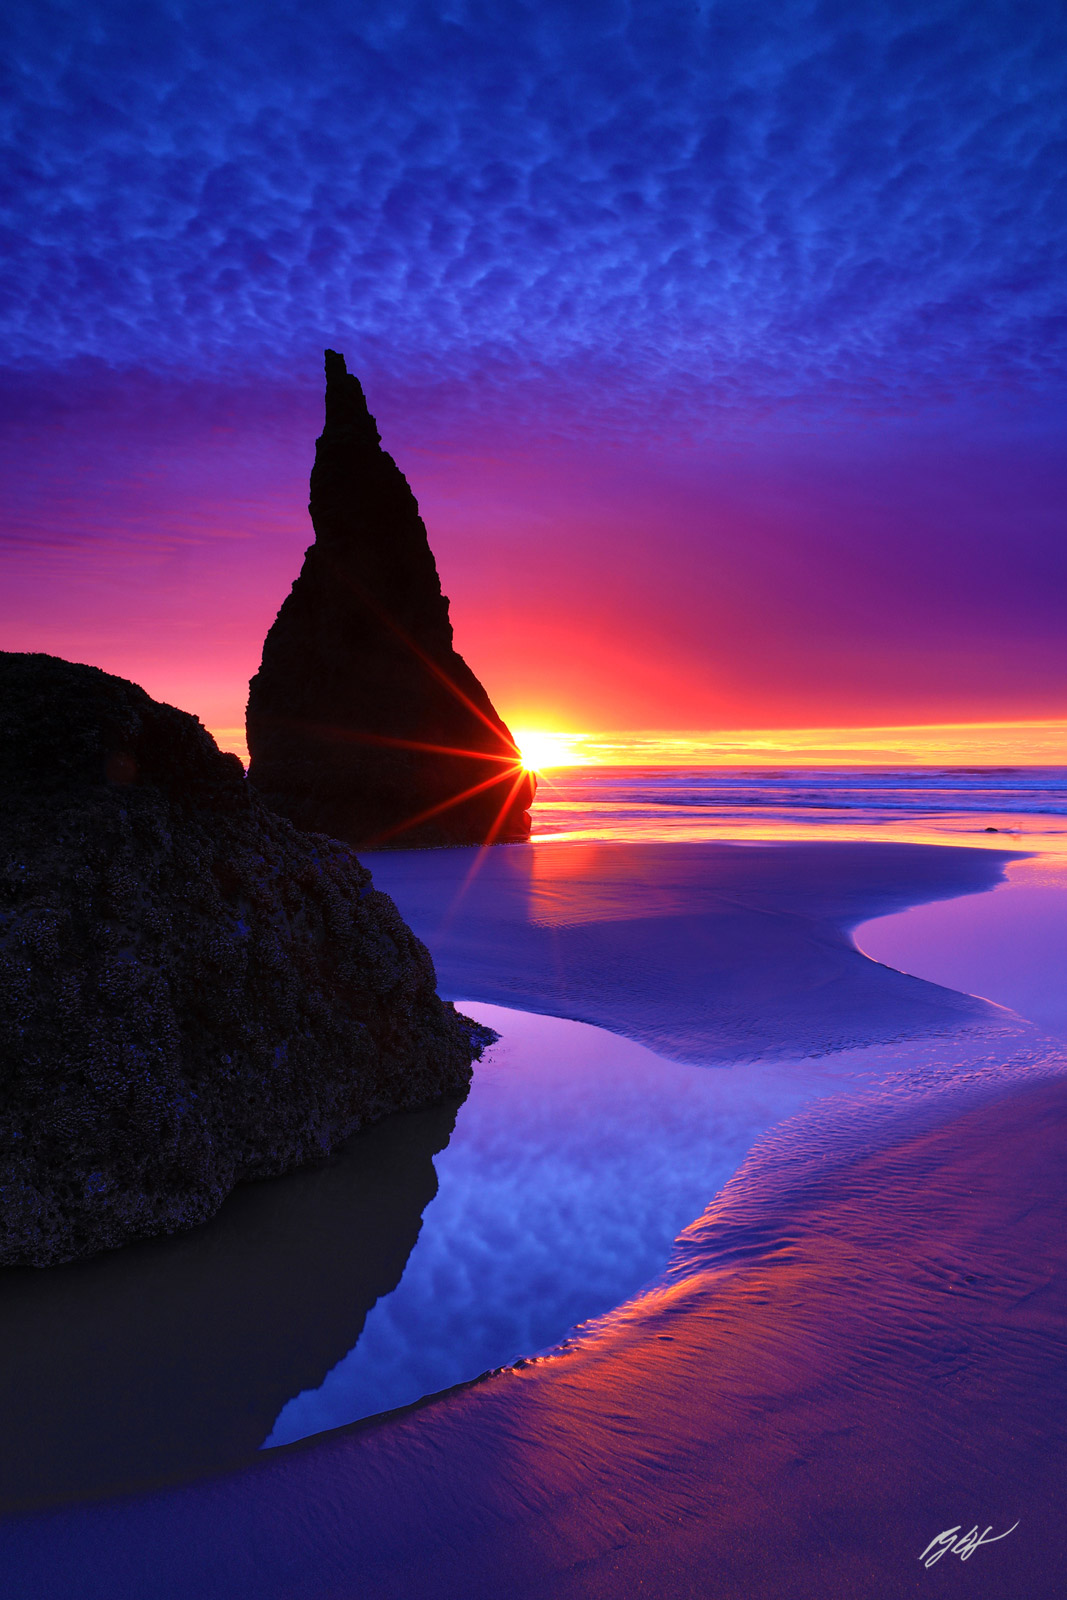 Sunset and Sunstar with the Wizards Hat from Face Rock Beach in Bandon on the Southern Oregon Coast